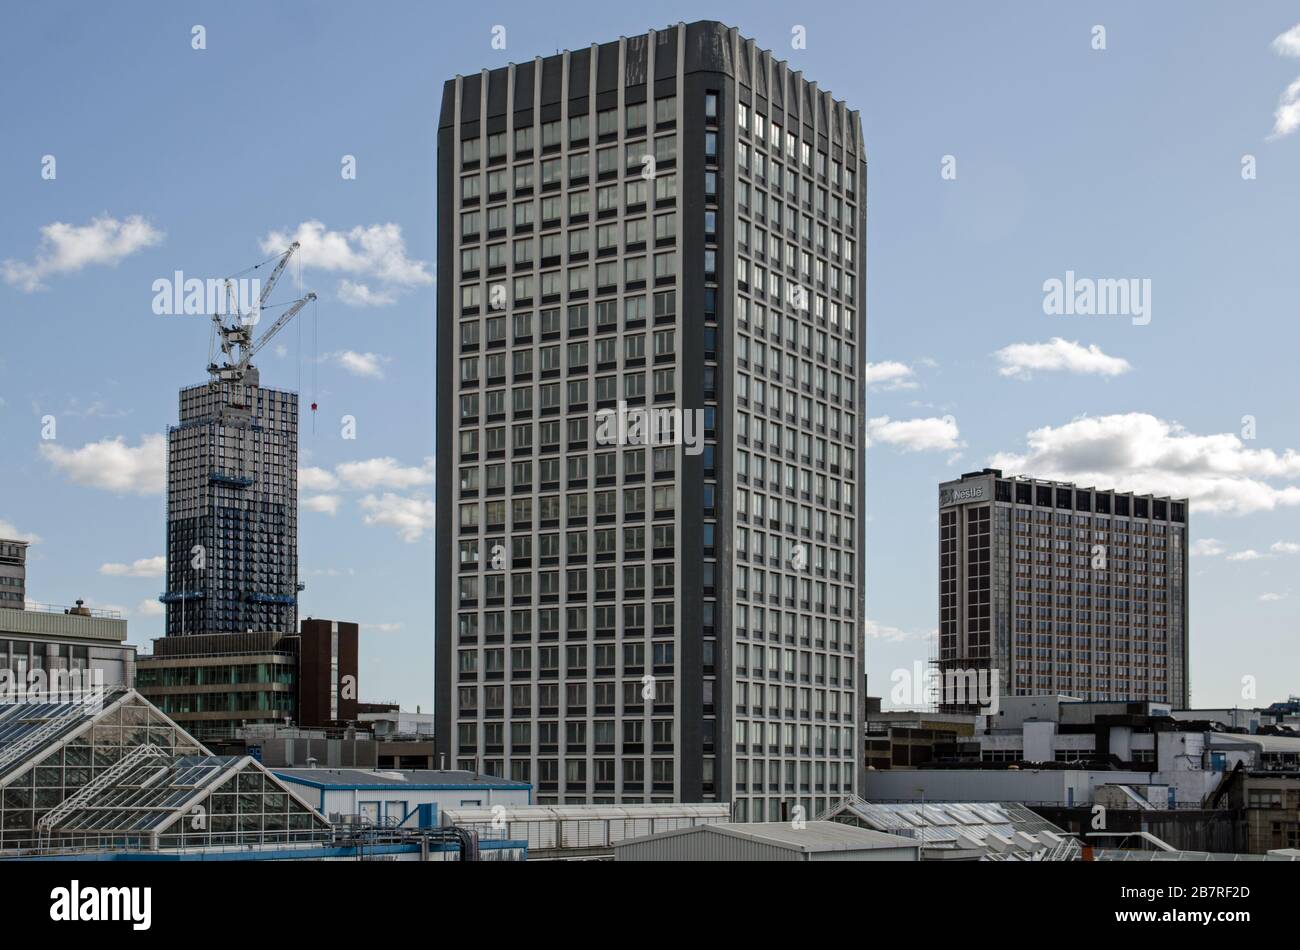 Tall  buildings including one of the Whitgift Centre office block and the former headquarters of Nestle in the centre of Croydon, South London. Stock Photo